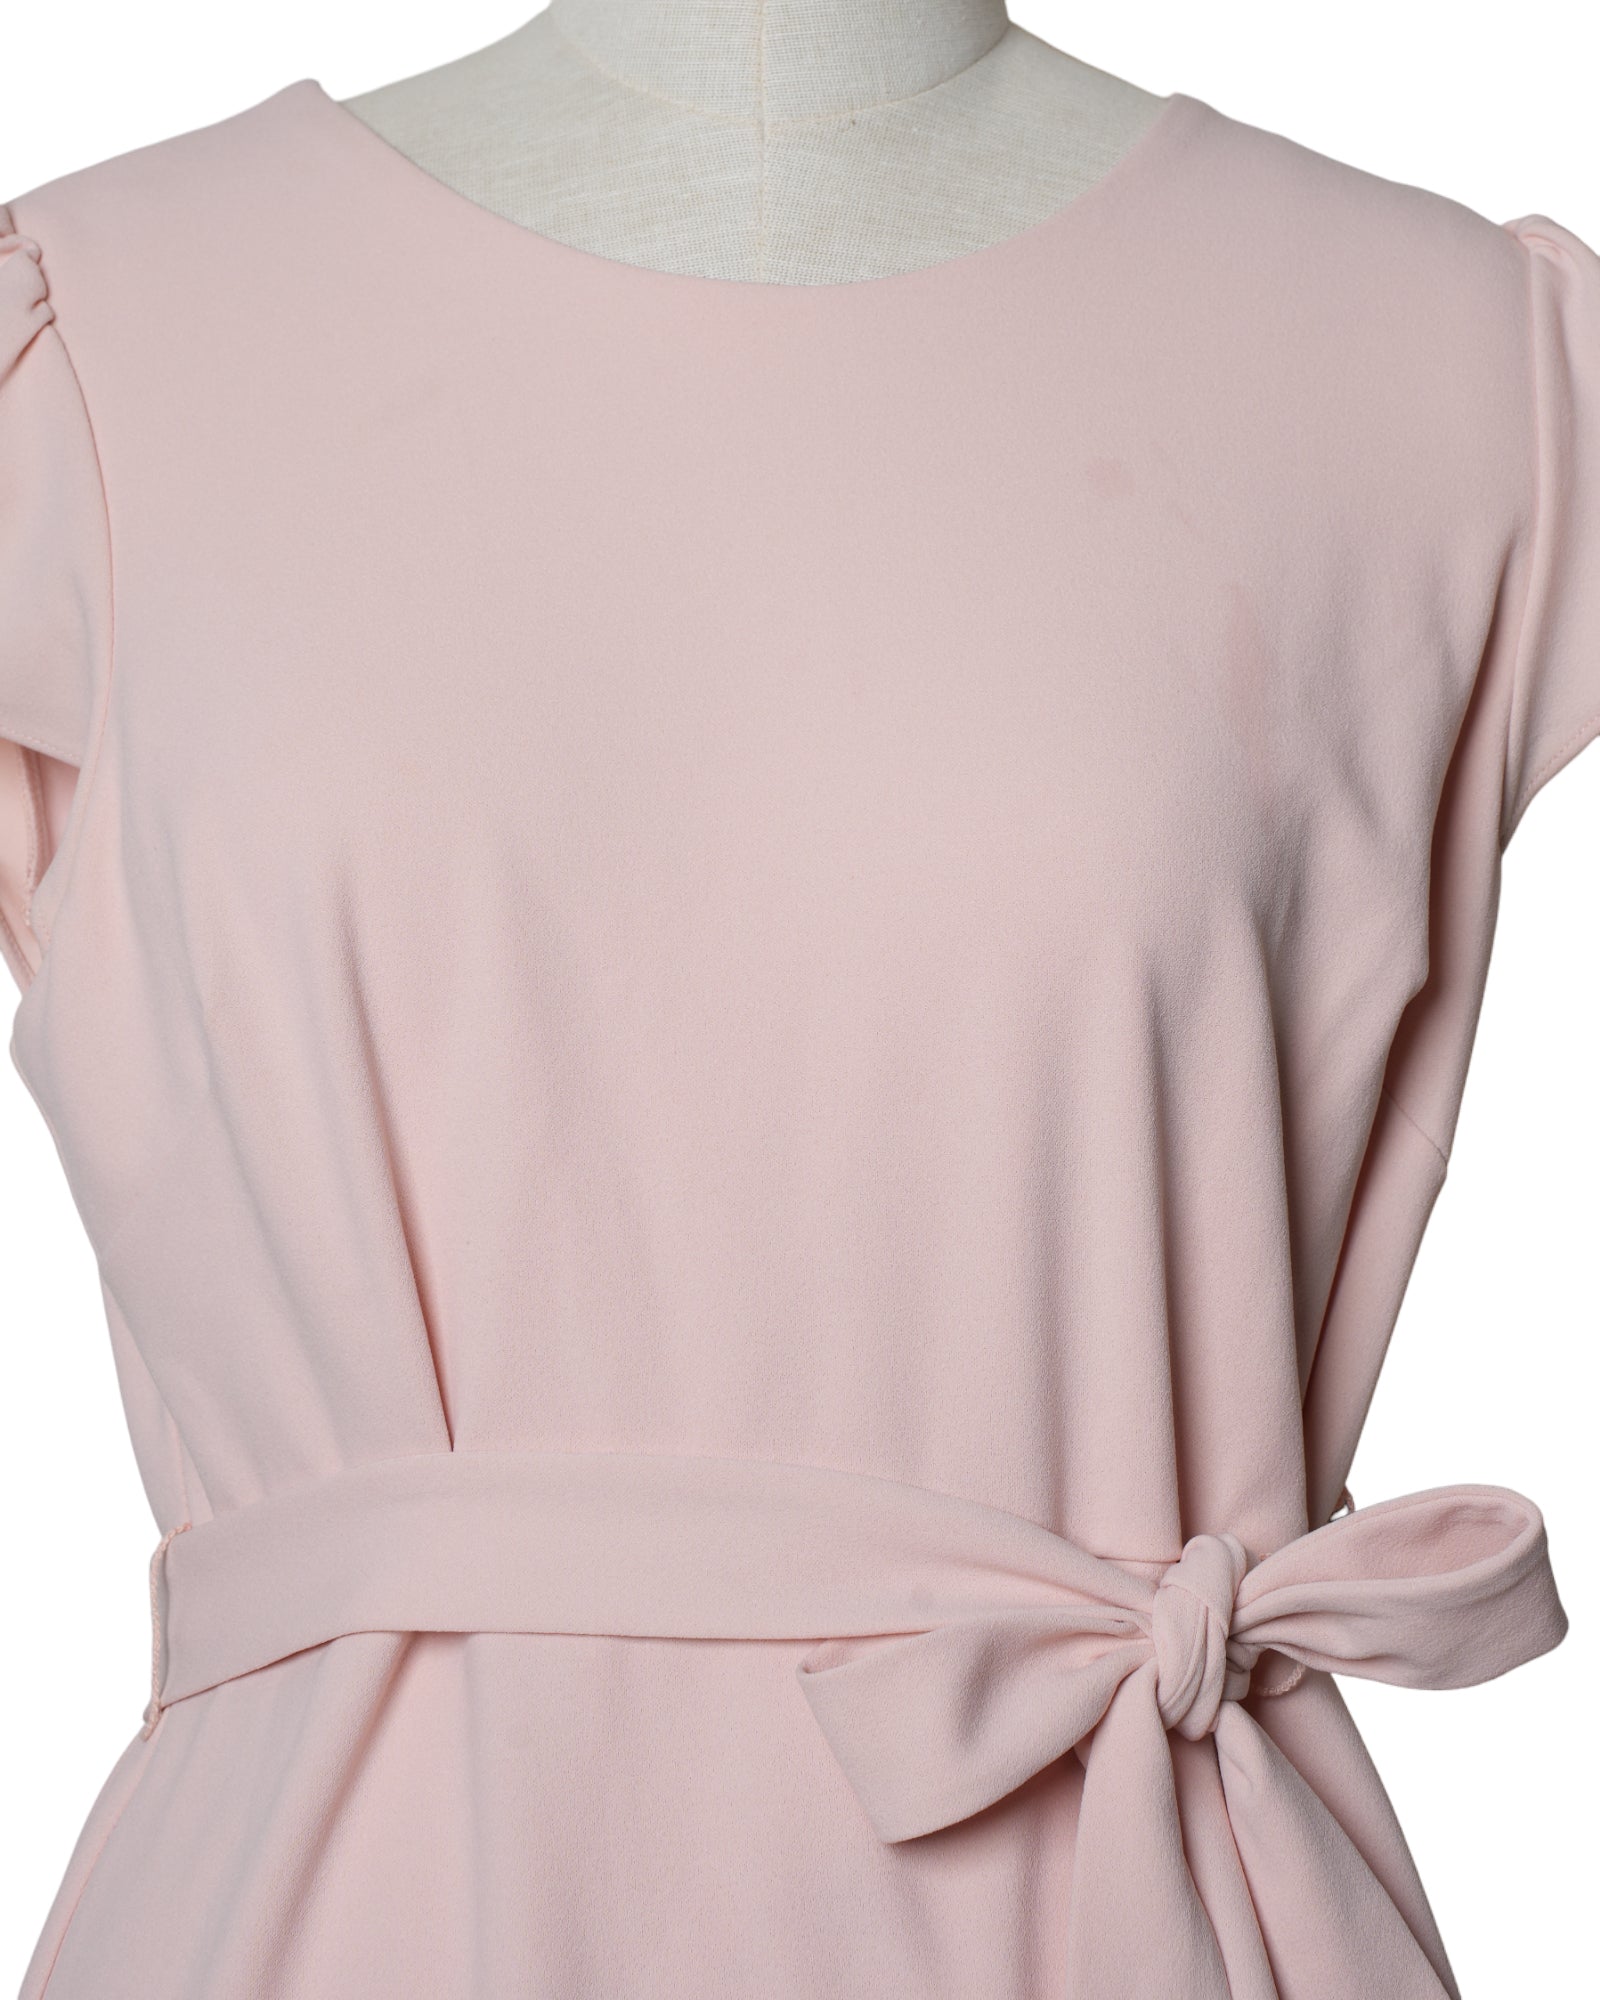 Dkny Baby Pink Belted Dress